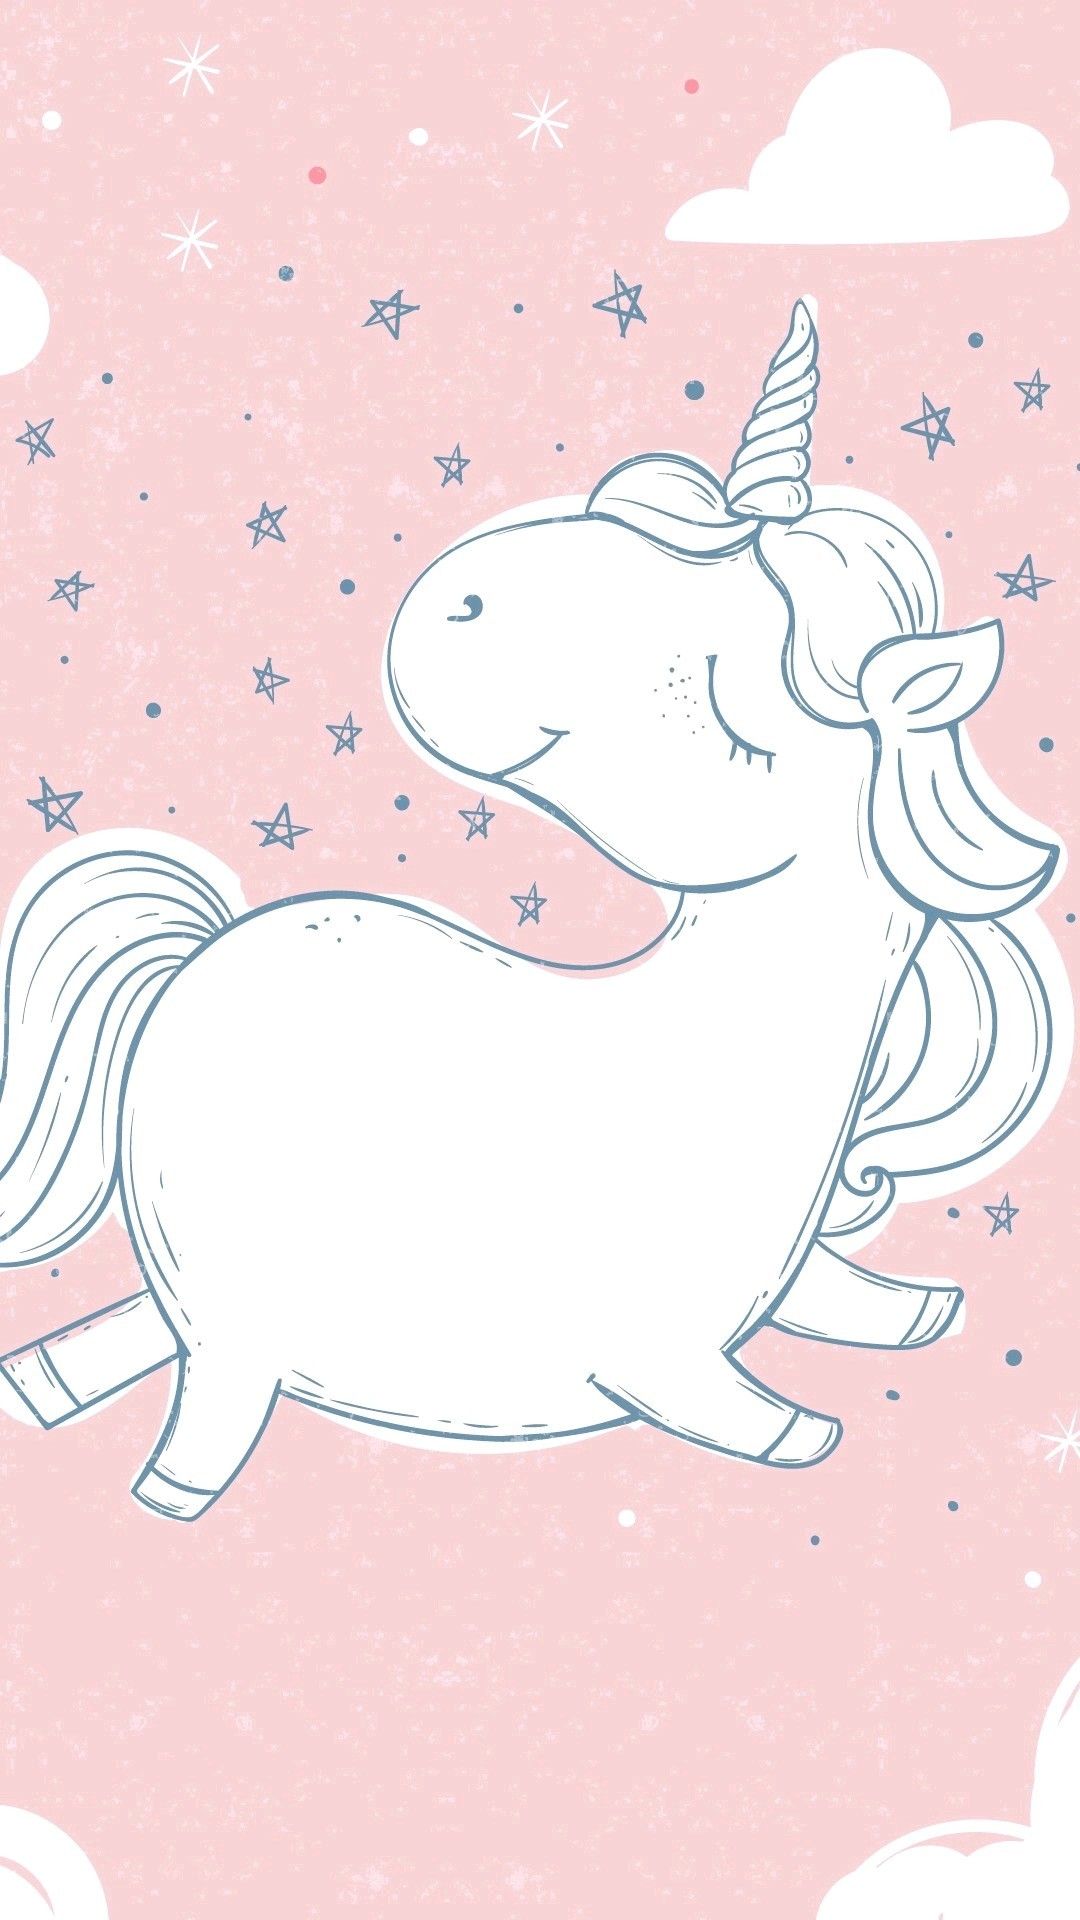 Unicorn Cute Wallpapers Free download 